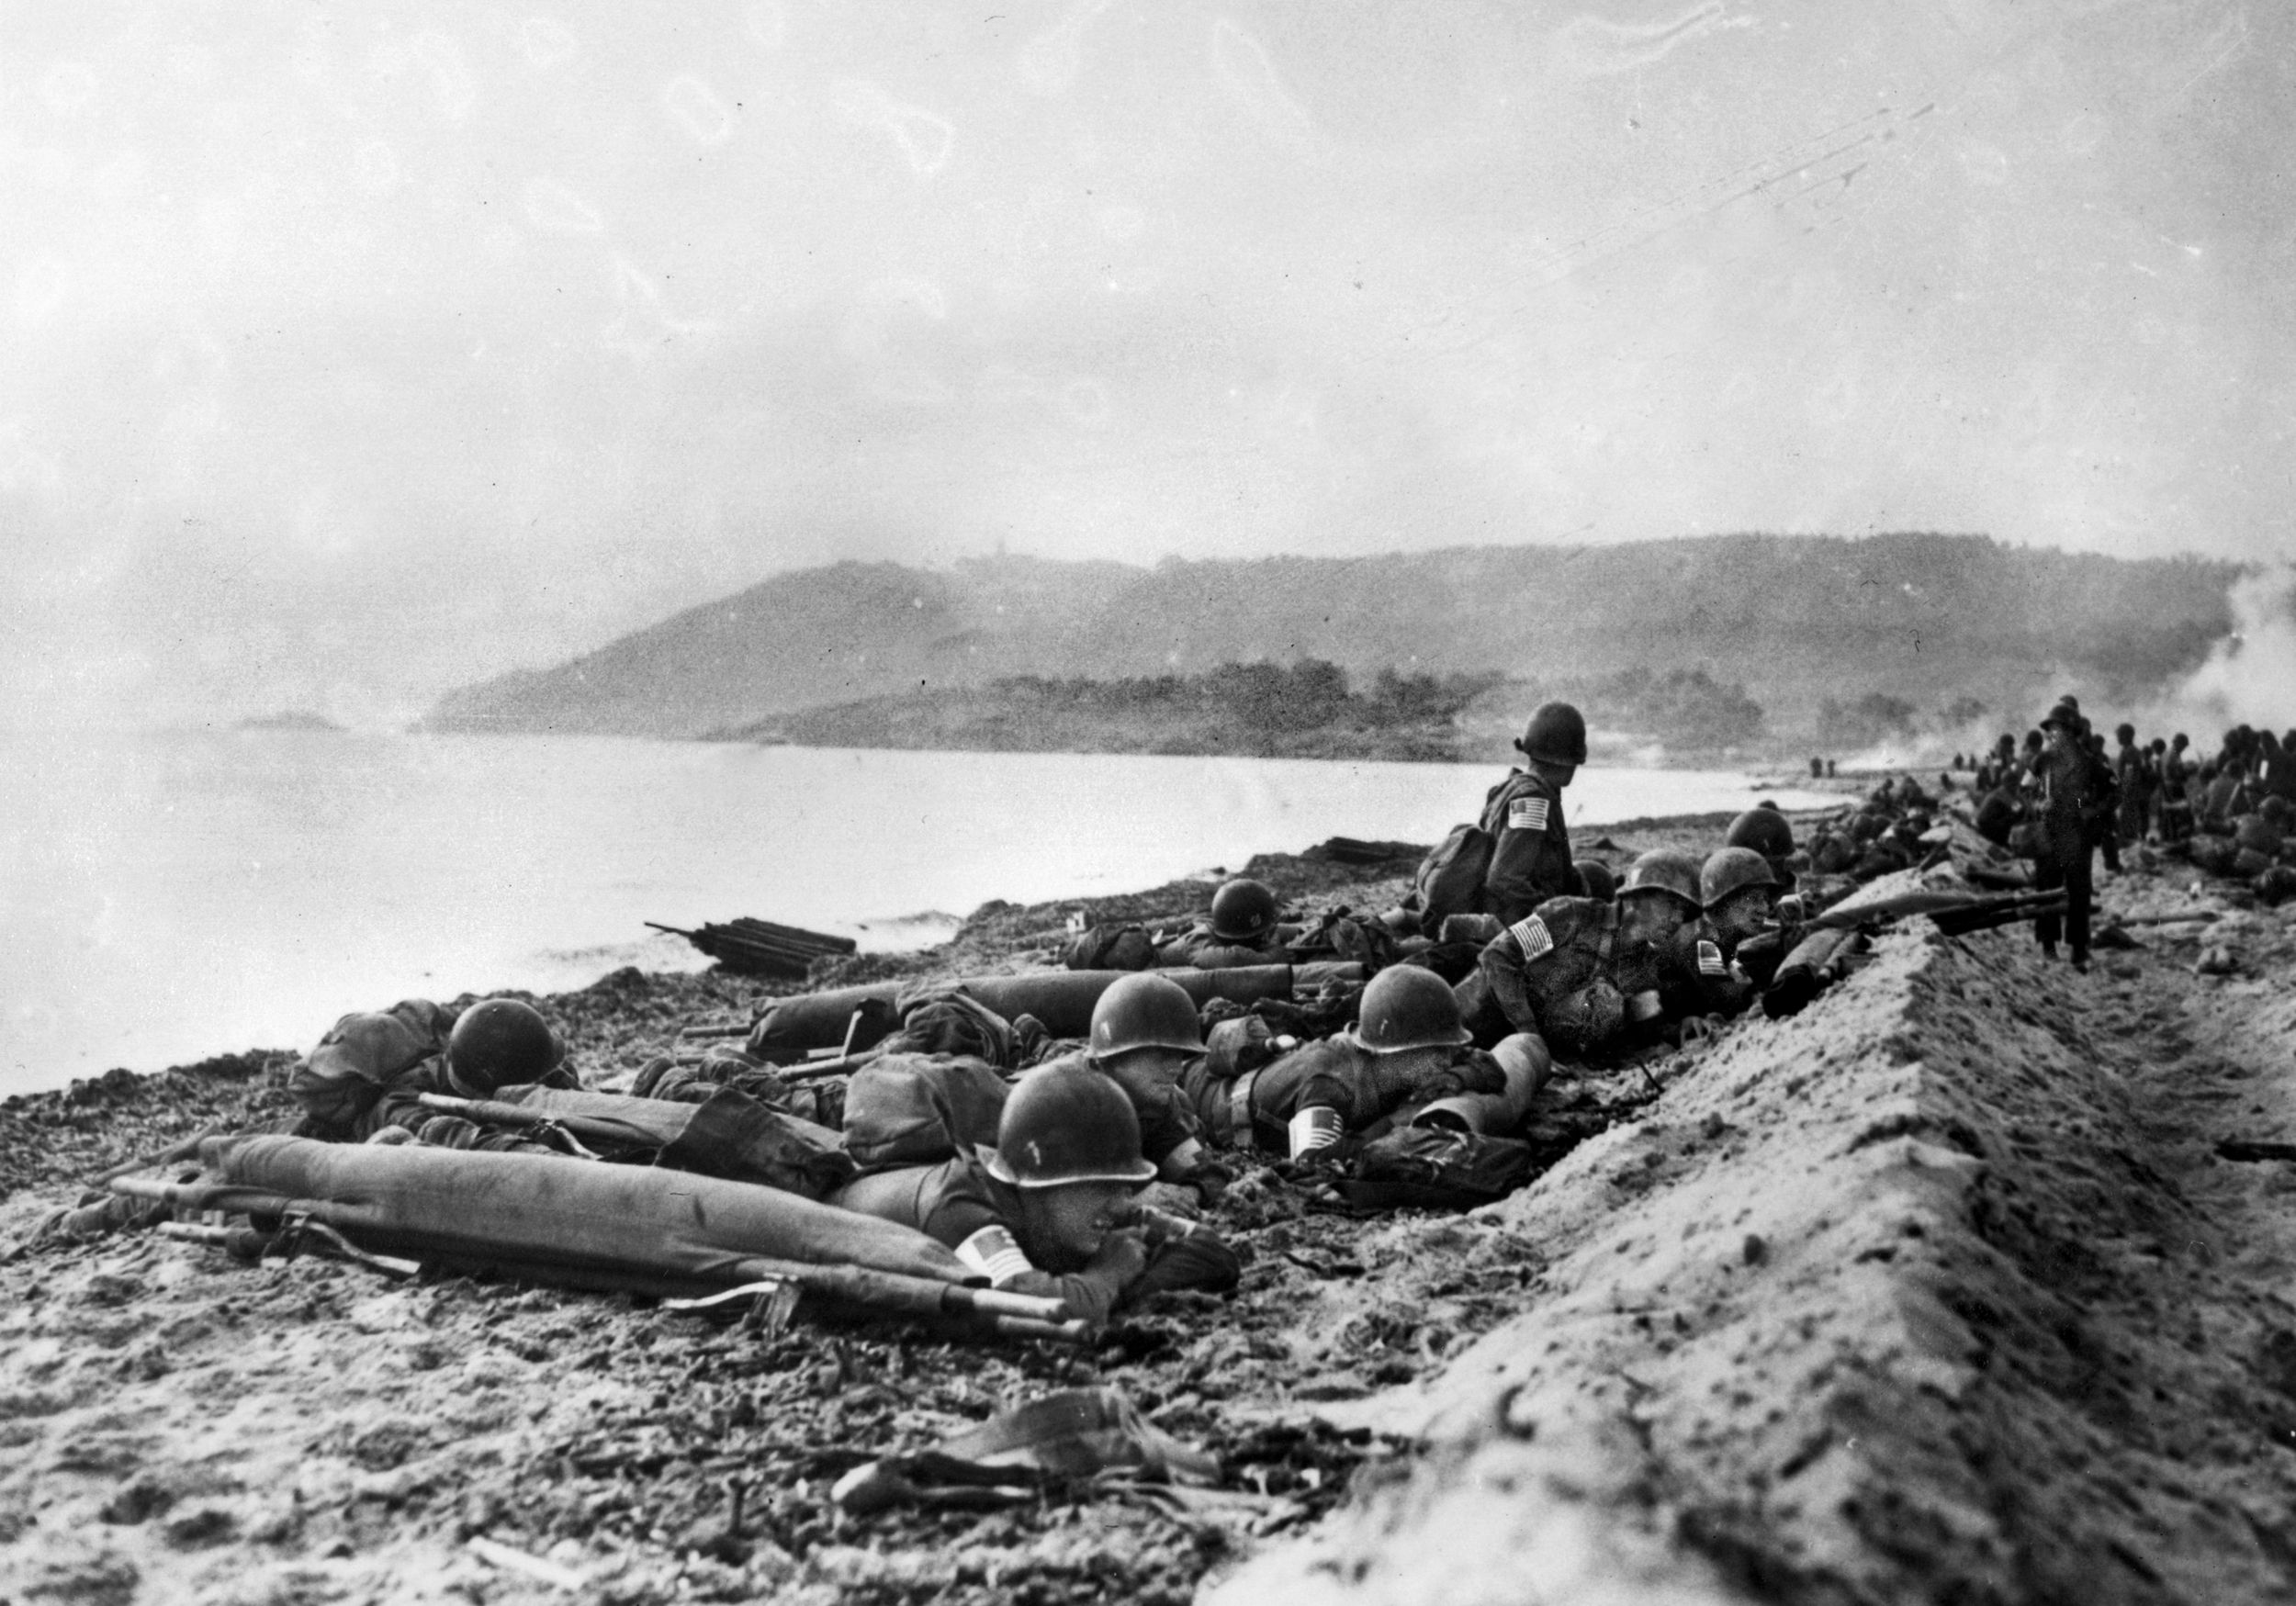 During Operation Dragoon, the invasion of southern France on August 15, 1944, 3rd Division troops hug the sand near resort town of St. Tropez. Twenty-one members of the division would earn Medals of Honor during the campaign for France, seven posthumously.